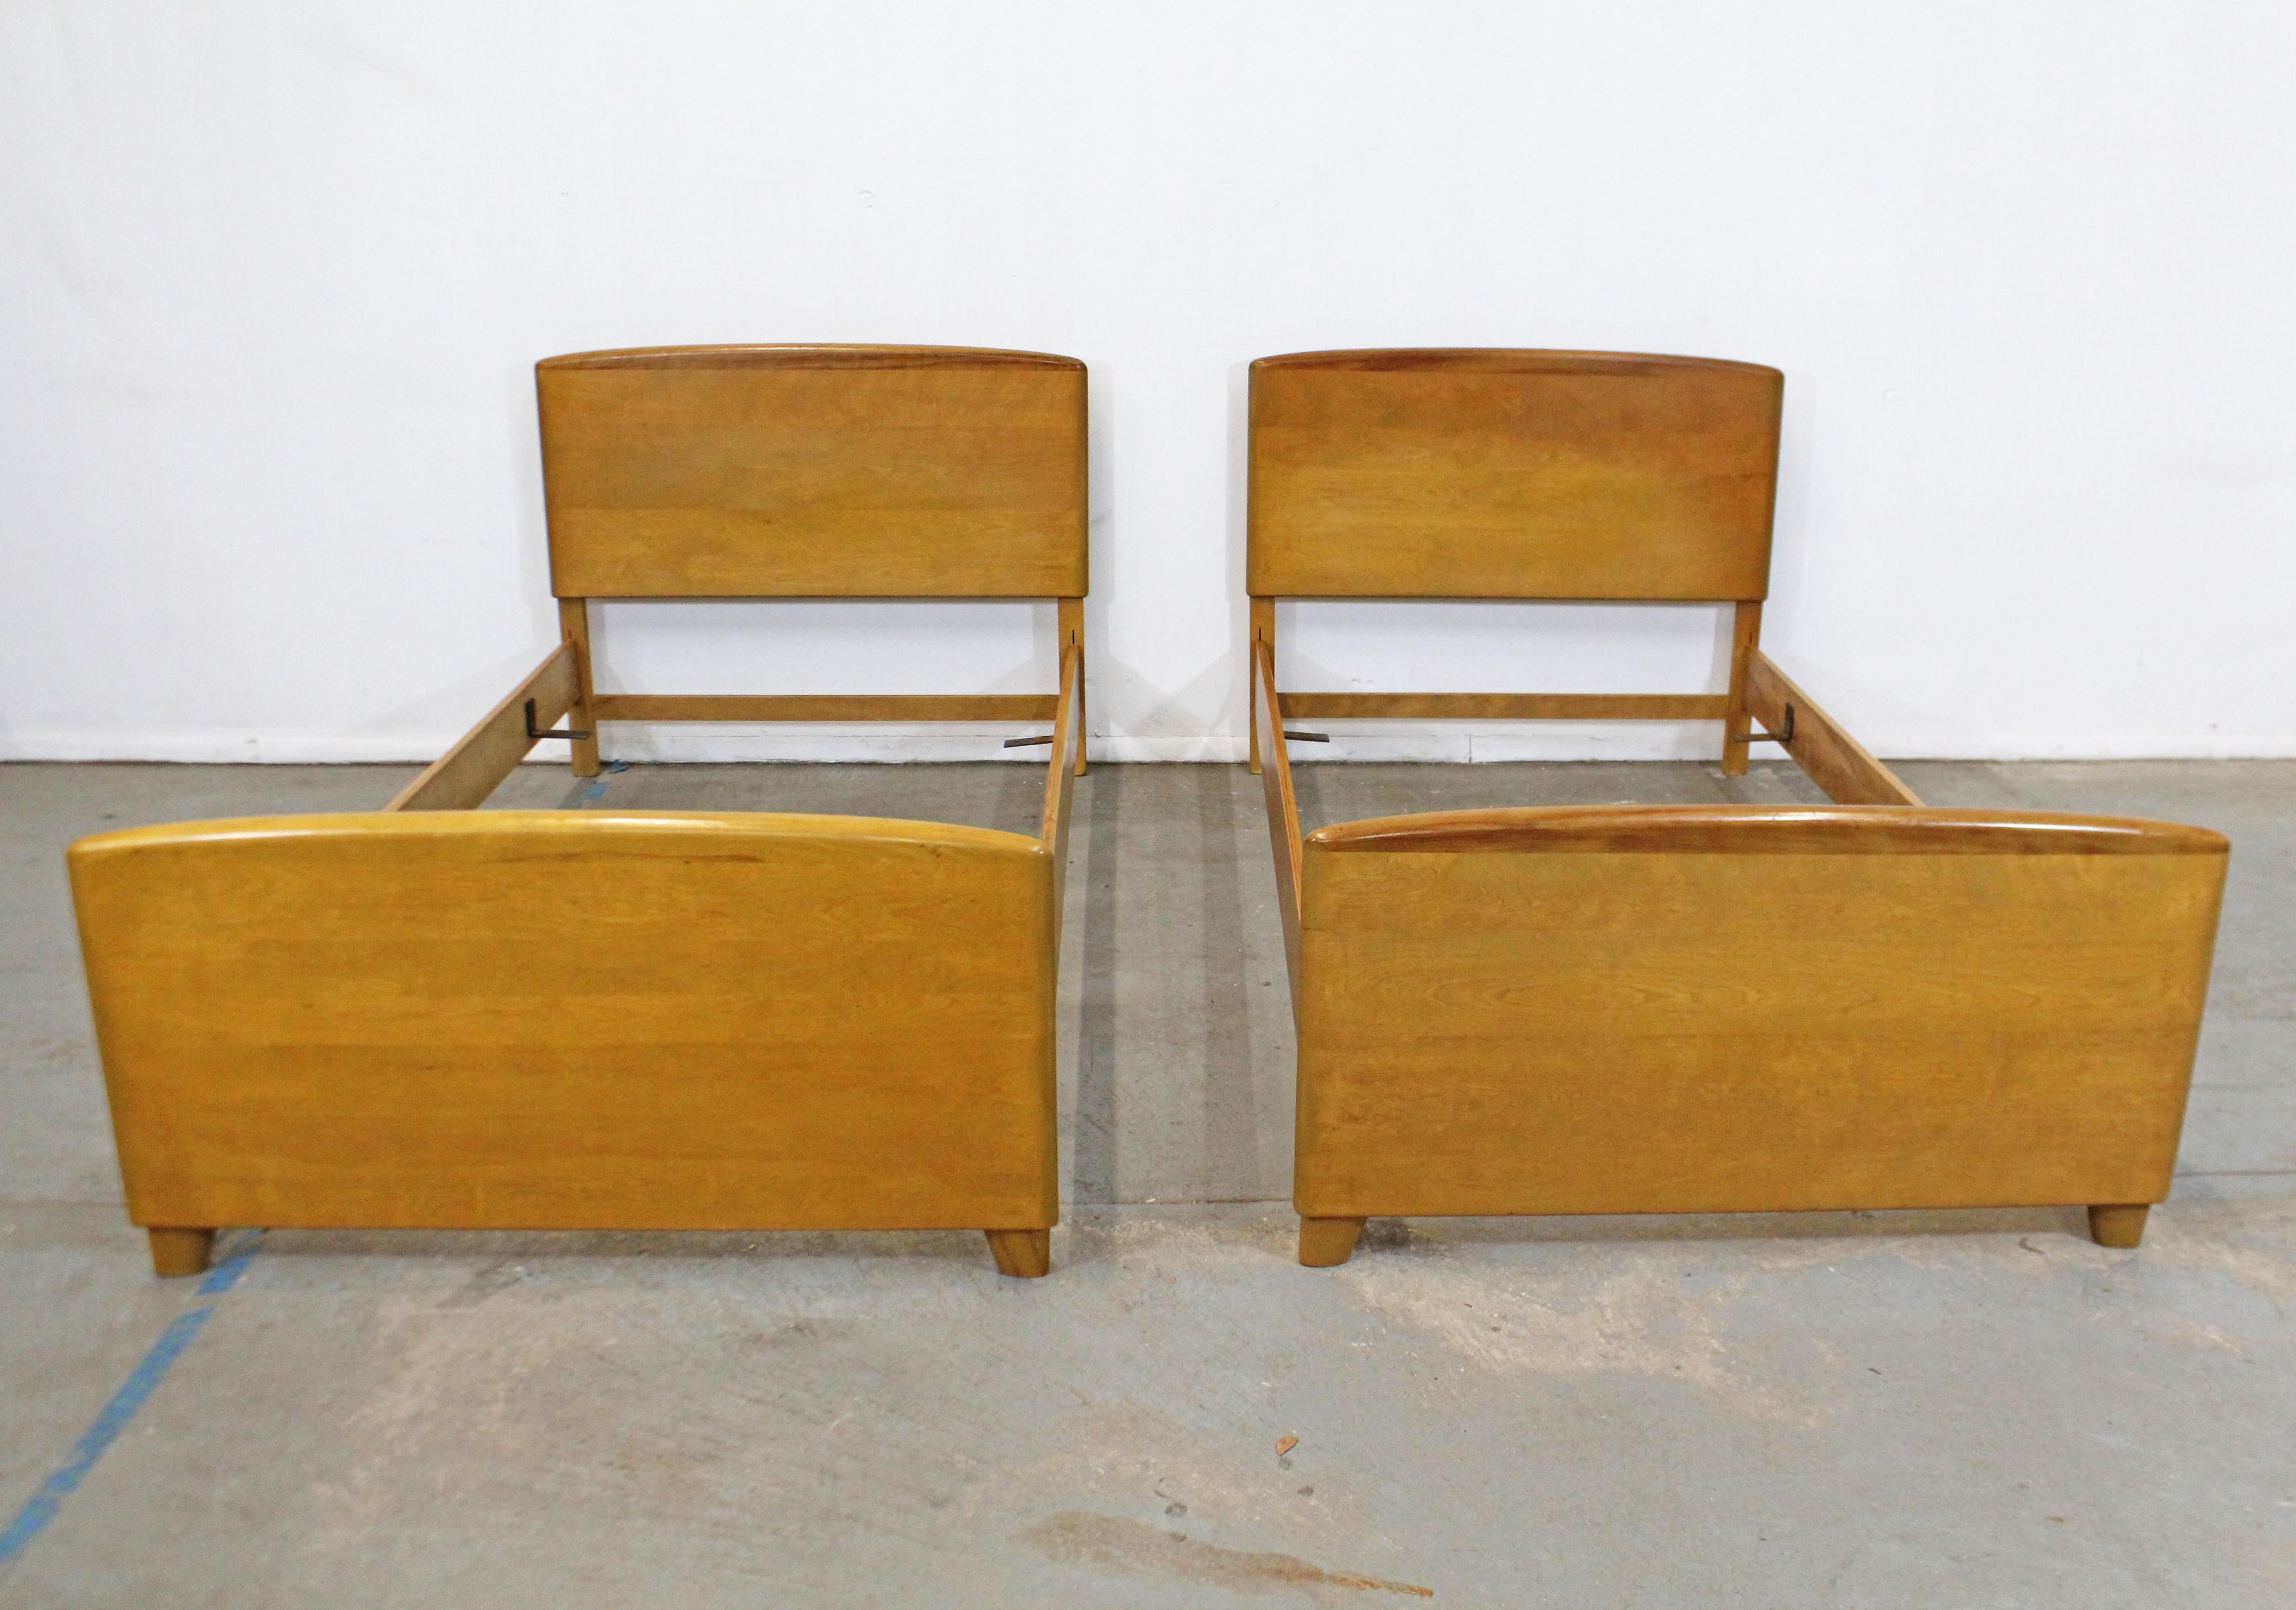 Pair of Mid-Century Modern Heywood Wakefield twin size bed frames

What a find. Offered is a pair of vintage Mid-Century Modern twin size bed frames by Heywood Wakefield. I believe they are wheat, but they are not labeled. Includes headboard, foot